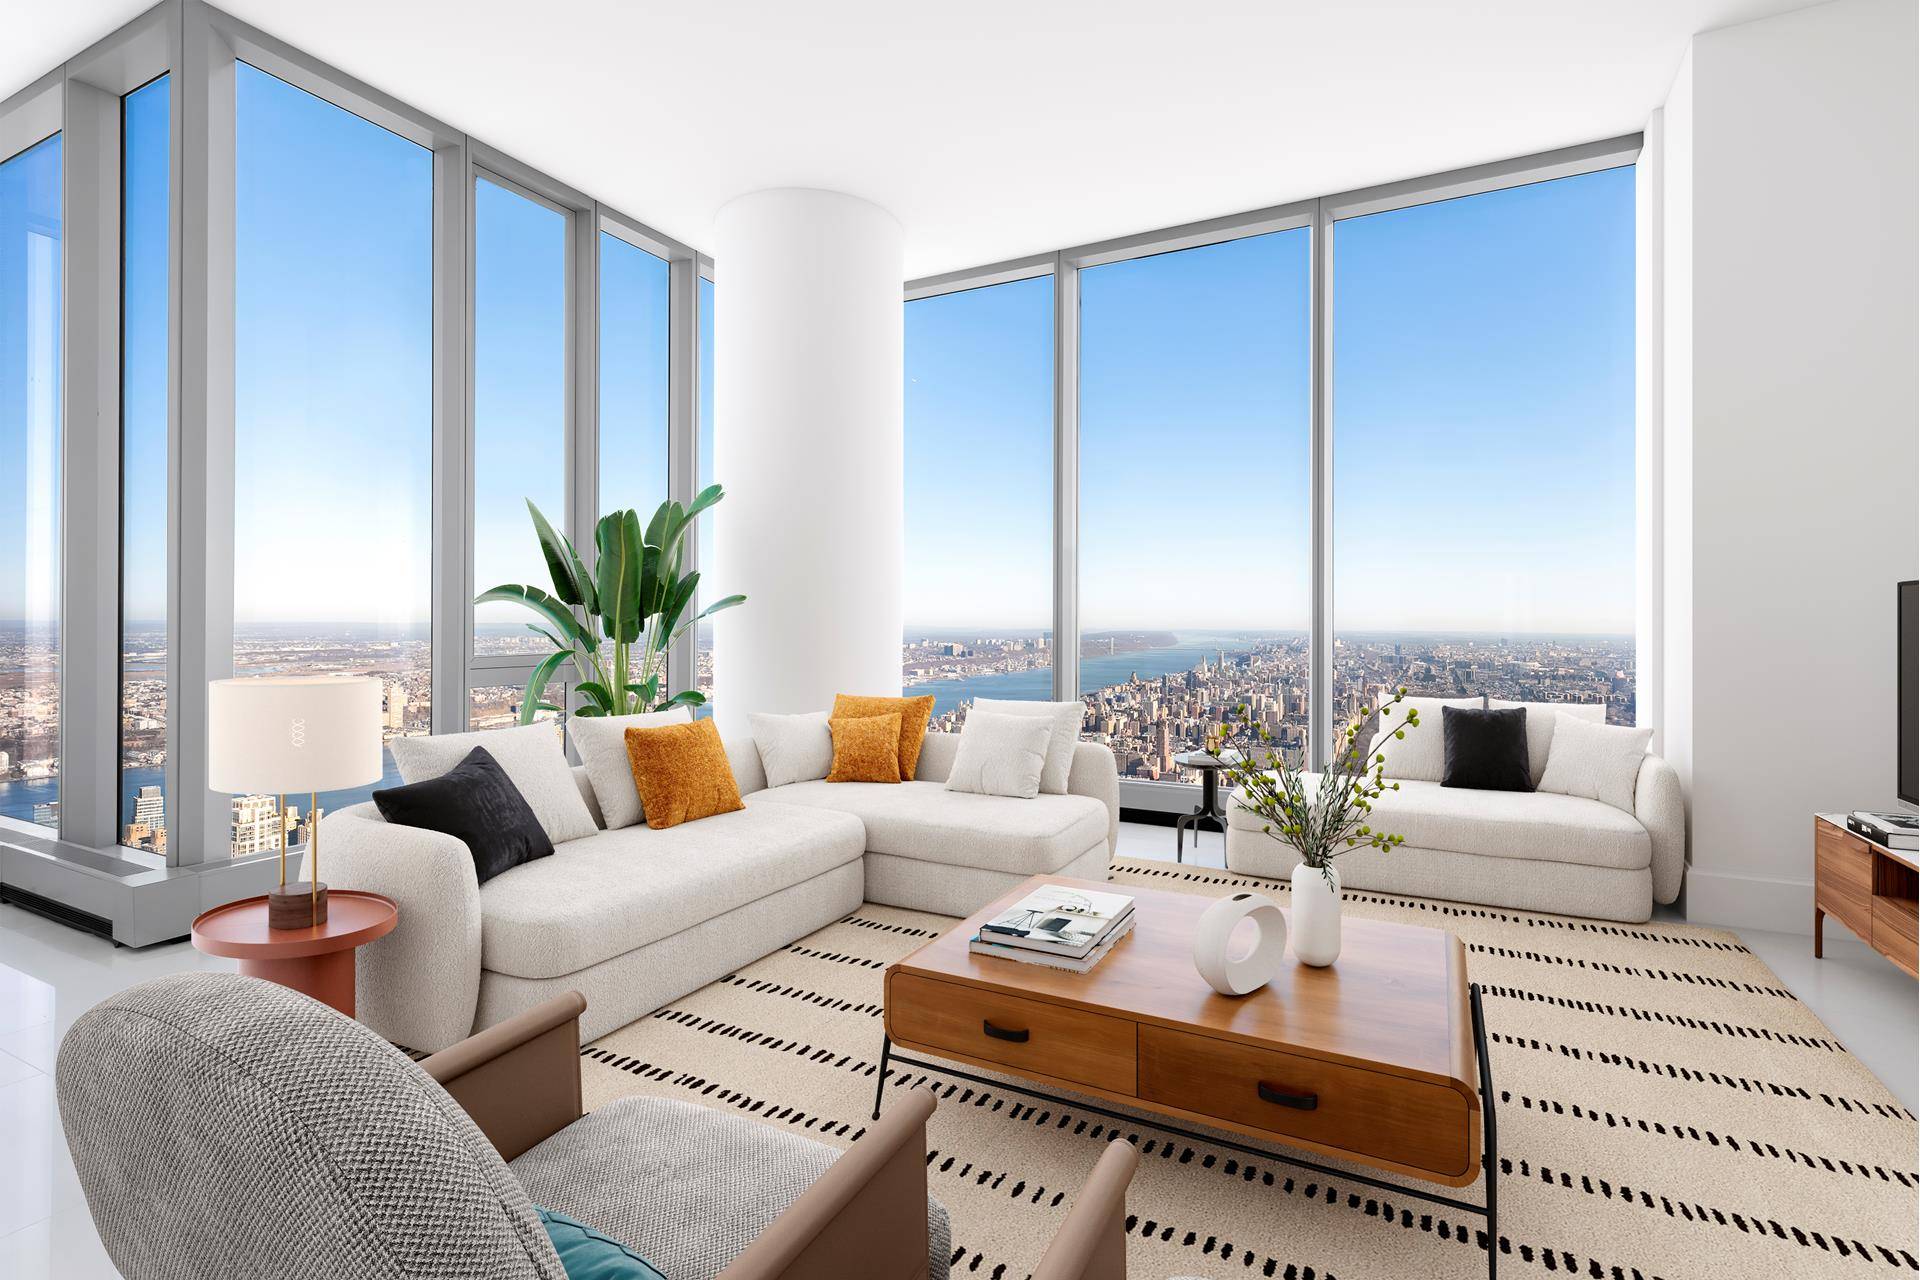 Perched 1, 000 feet above New York City, this stunning 3 bedroom, 3.